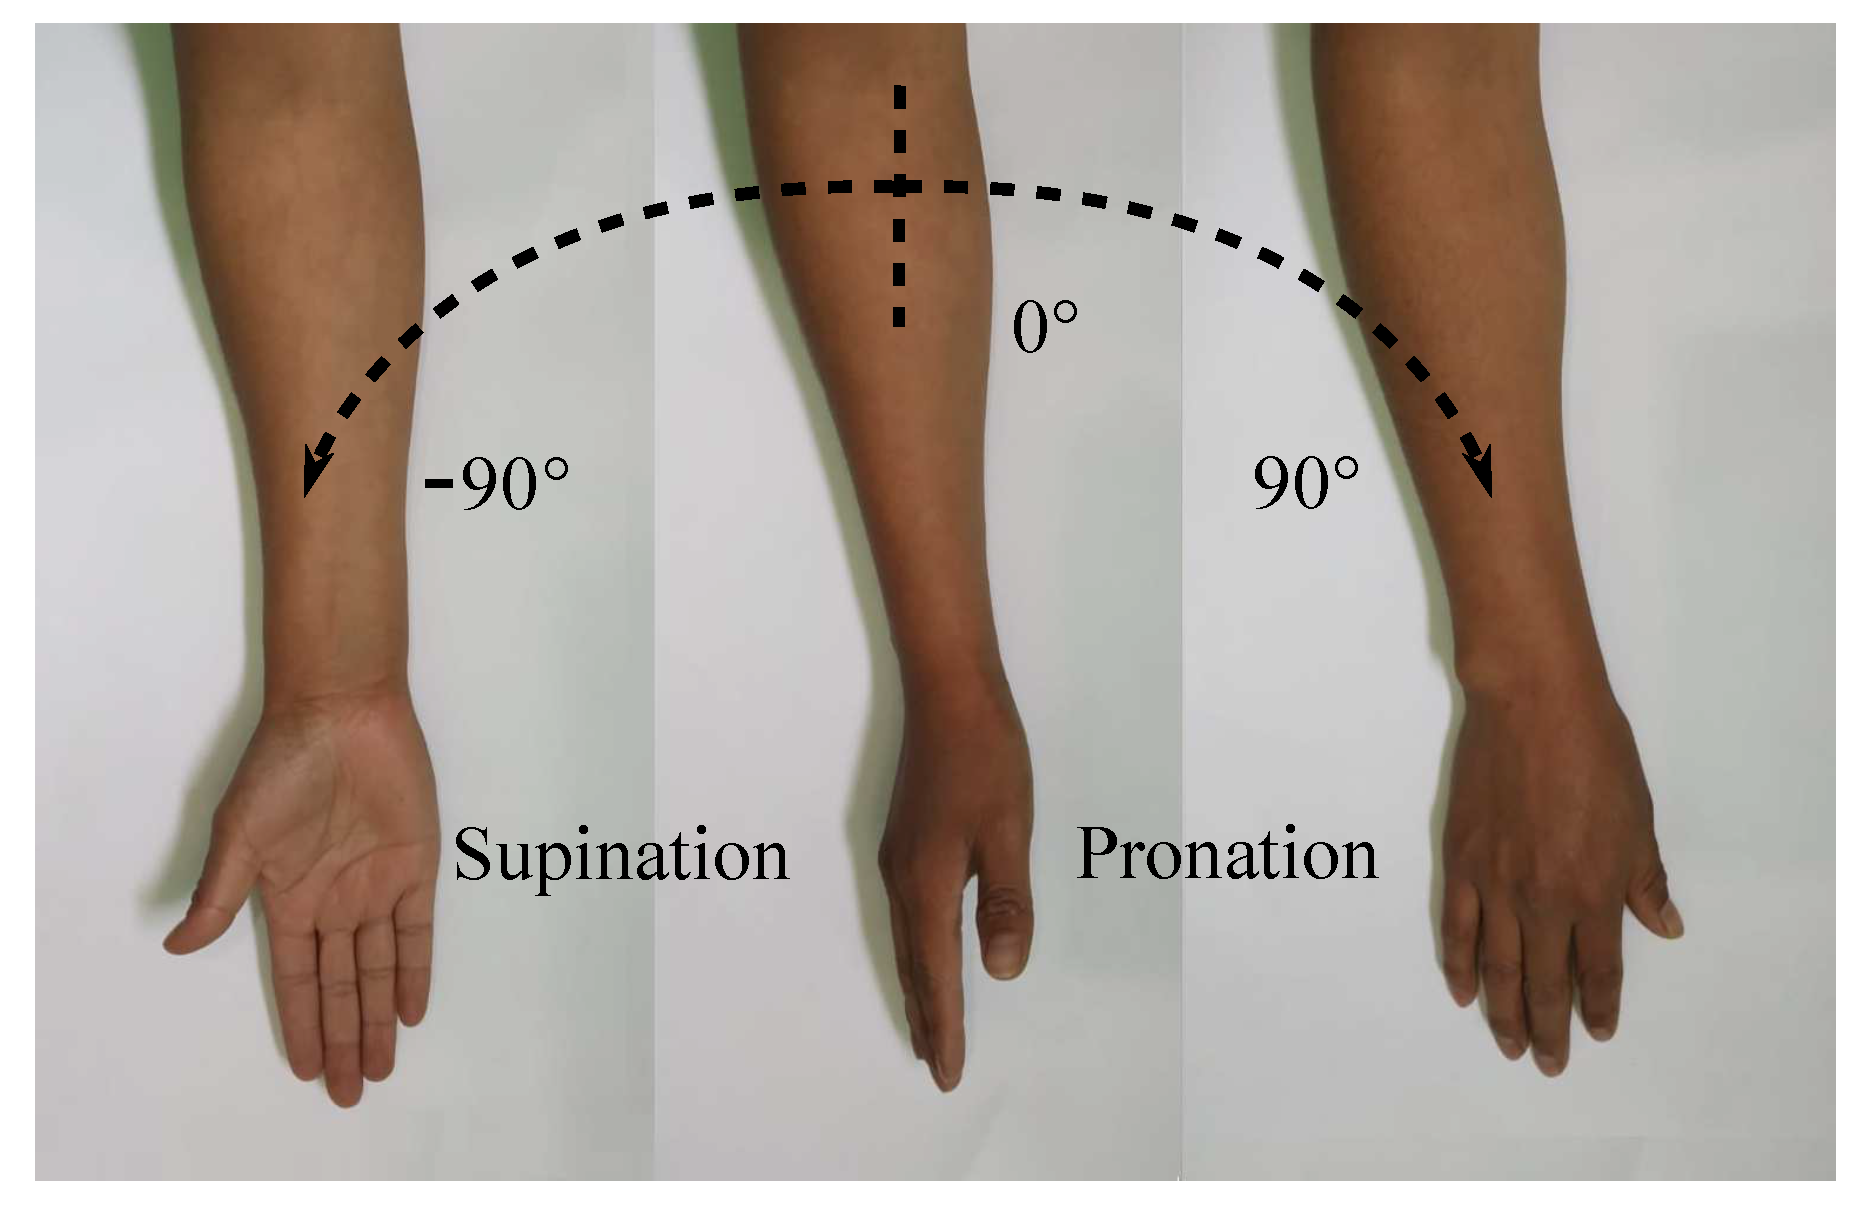 Supination (Foot Biomechanics) Explained - Types, Causes & Treatment